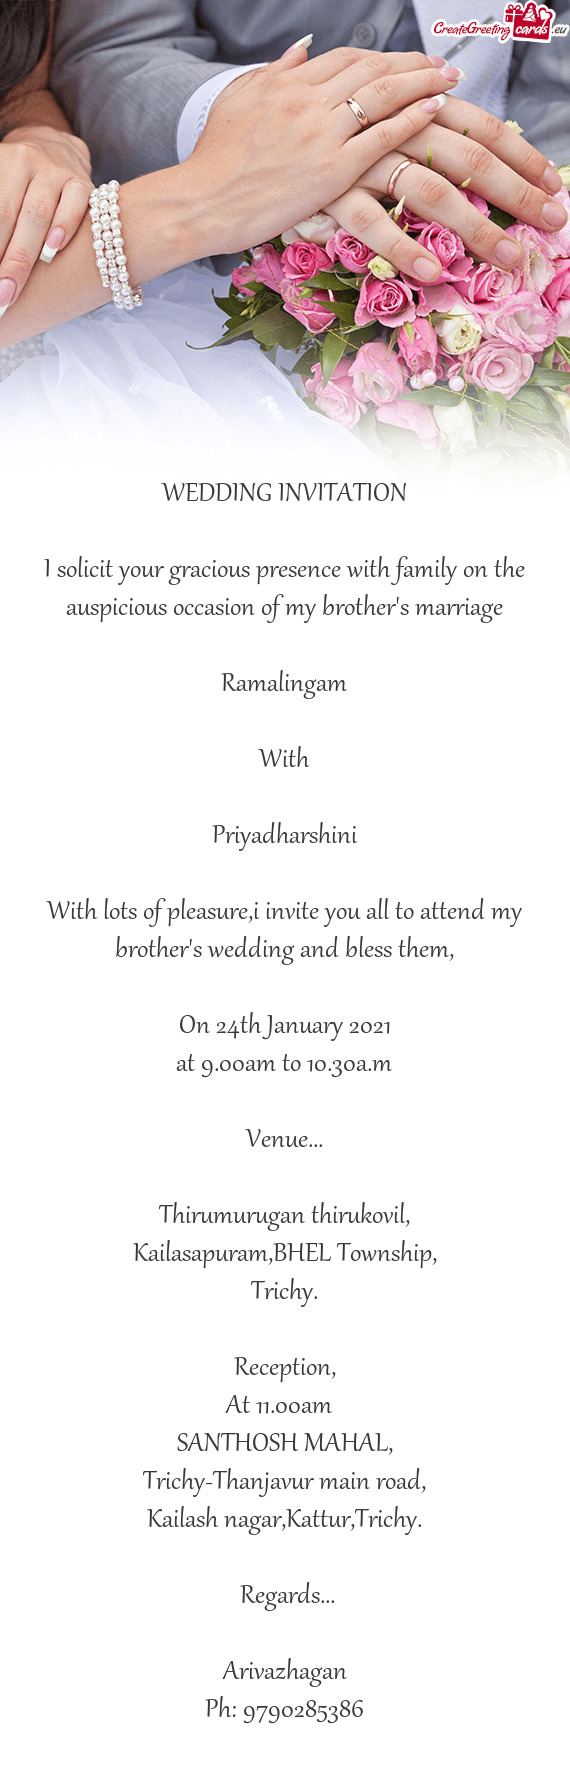 With lots of pleasure,i invite you all to attend my brother